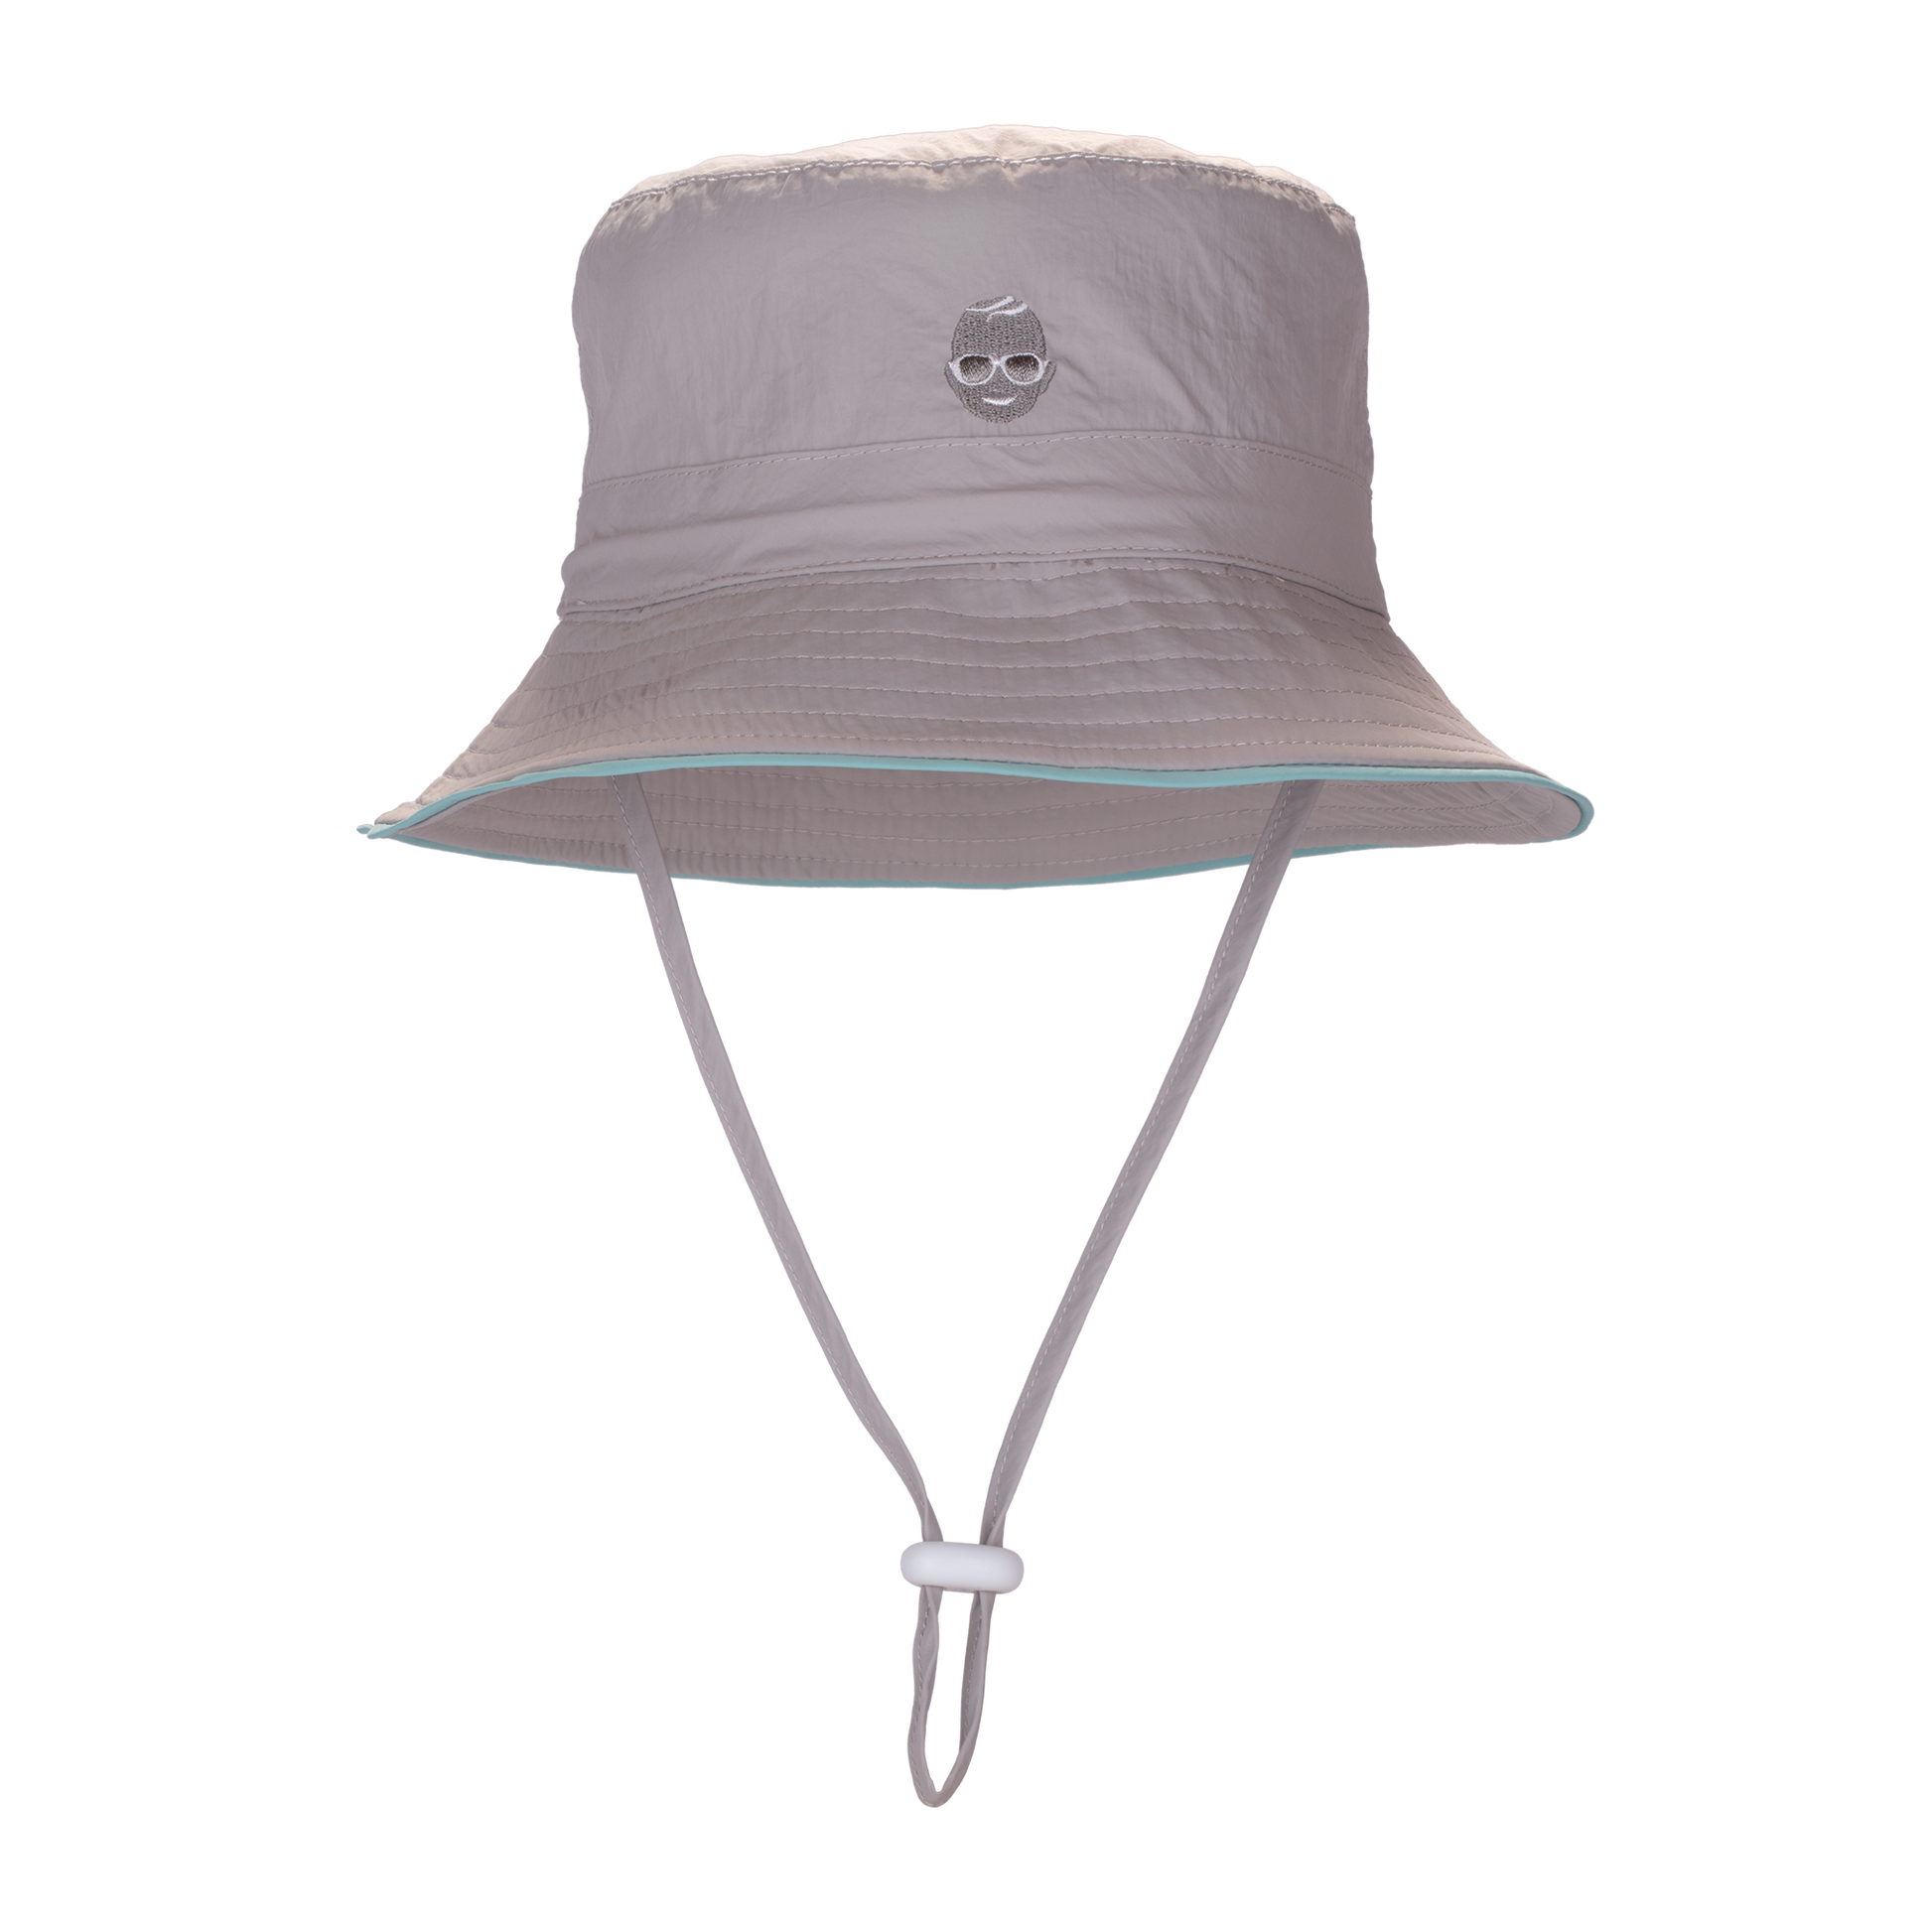 UPF 50+ Hats For Your Sun Protection